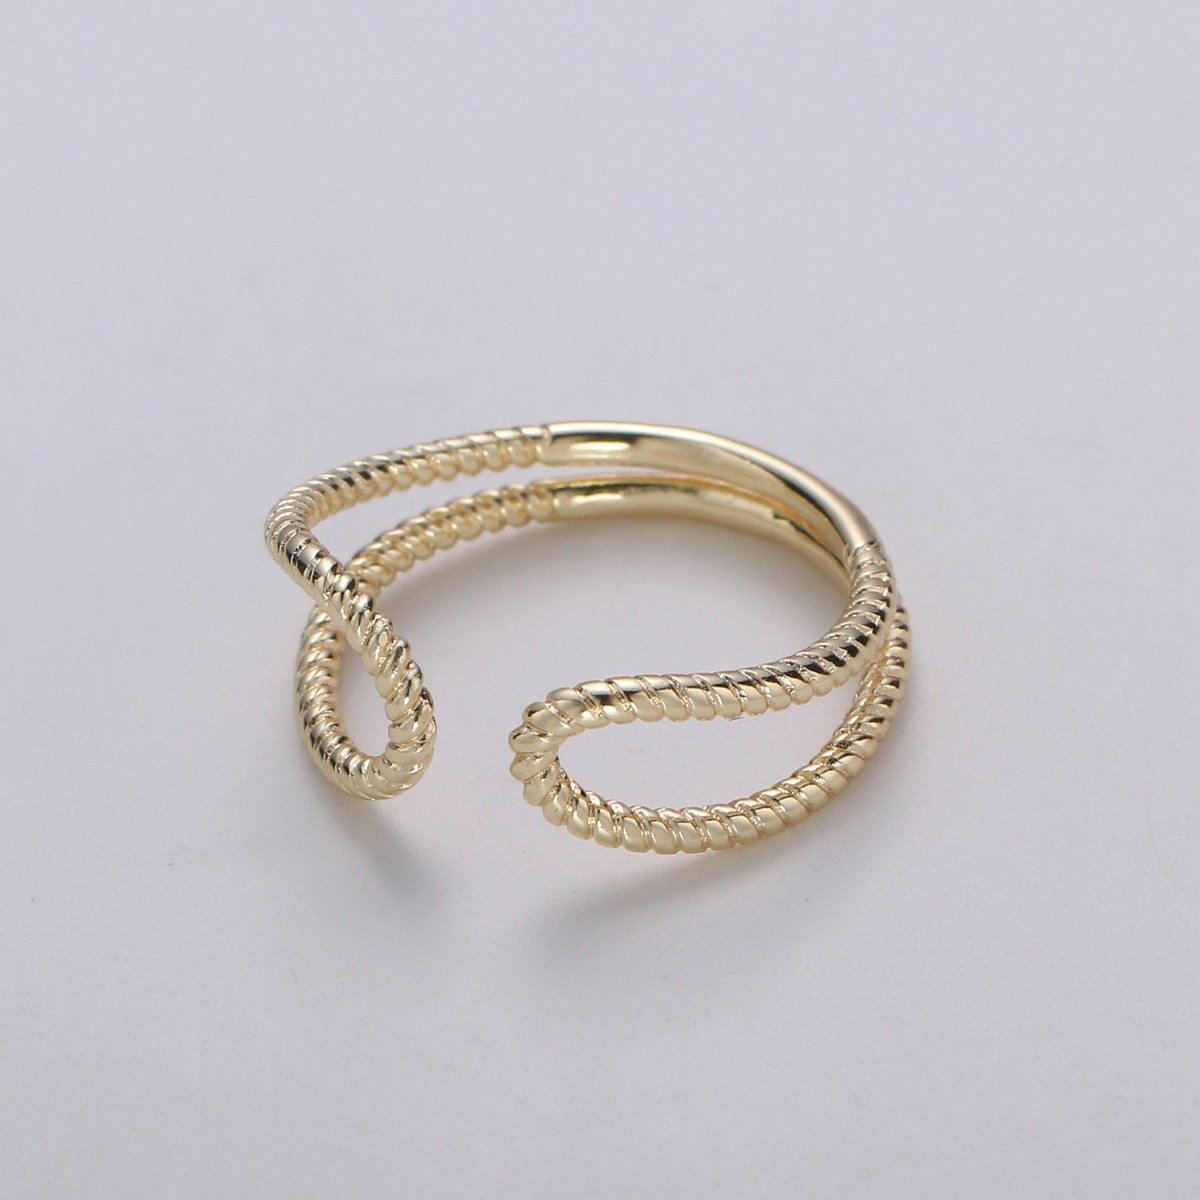 Gold Twisted Rope Ring, Boho Double Band Ring, Minimalist Open Ring, Adjustable Stack Ring, Midi Ring for Women R-118 - DLUXCA